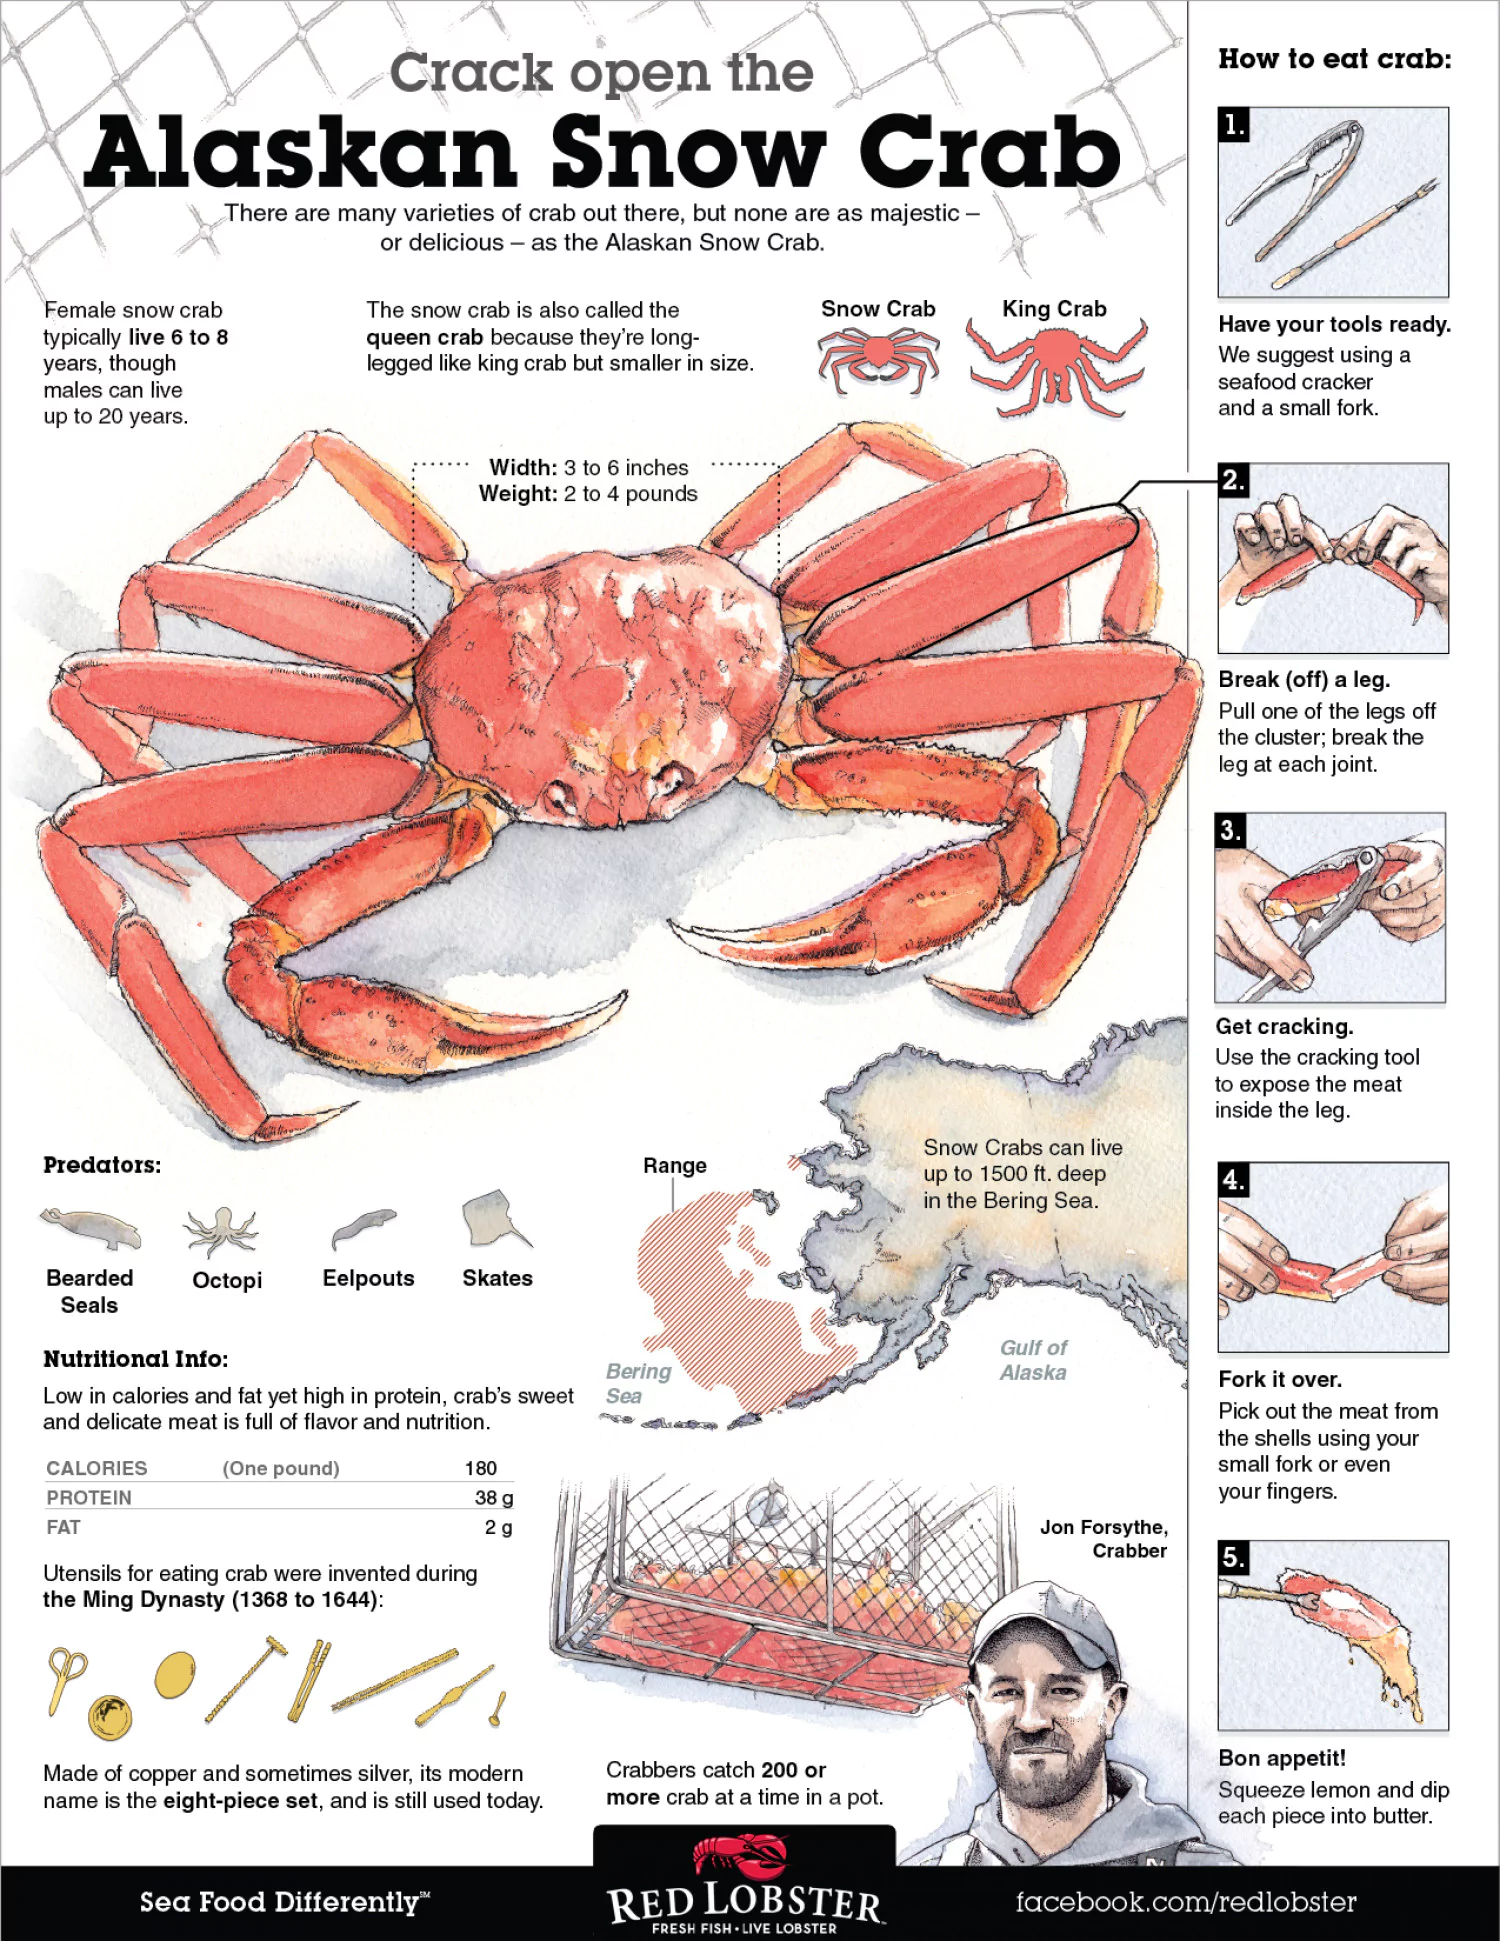 How to Eat Crab